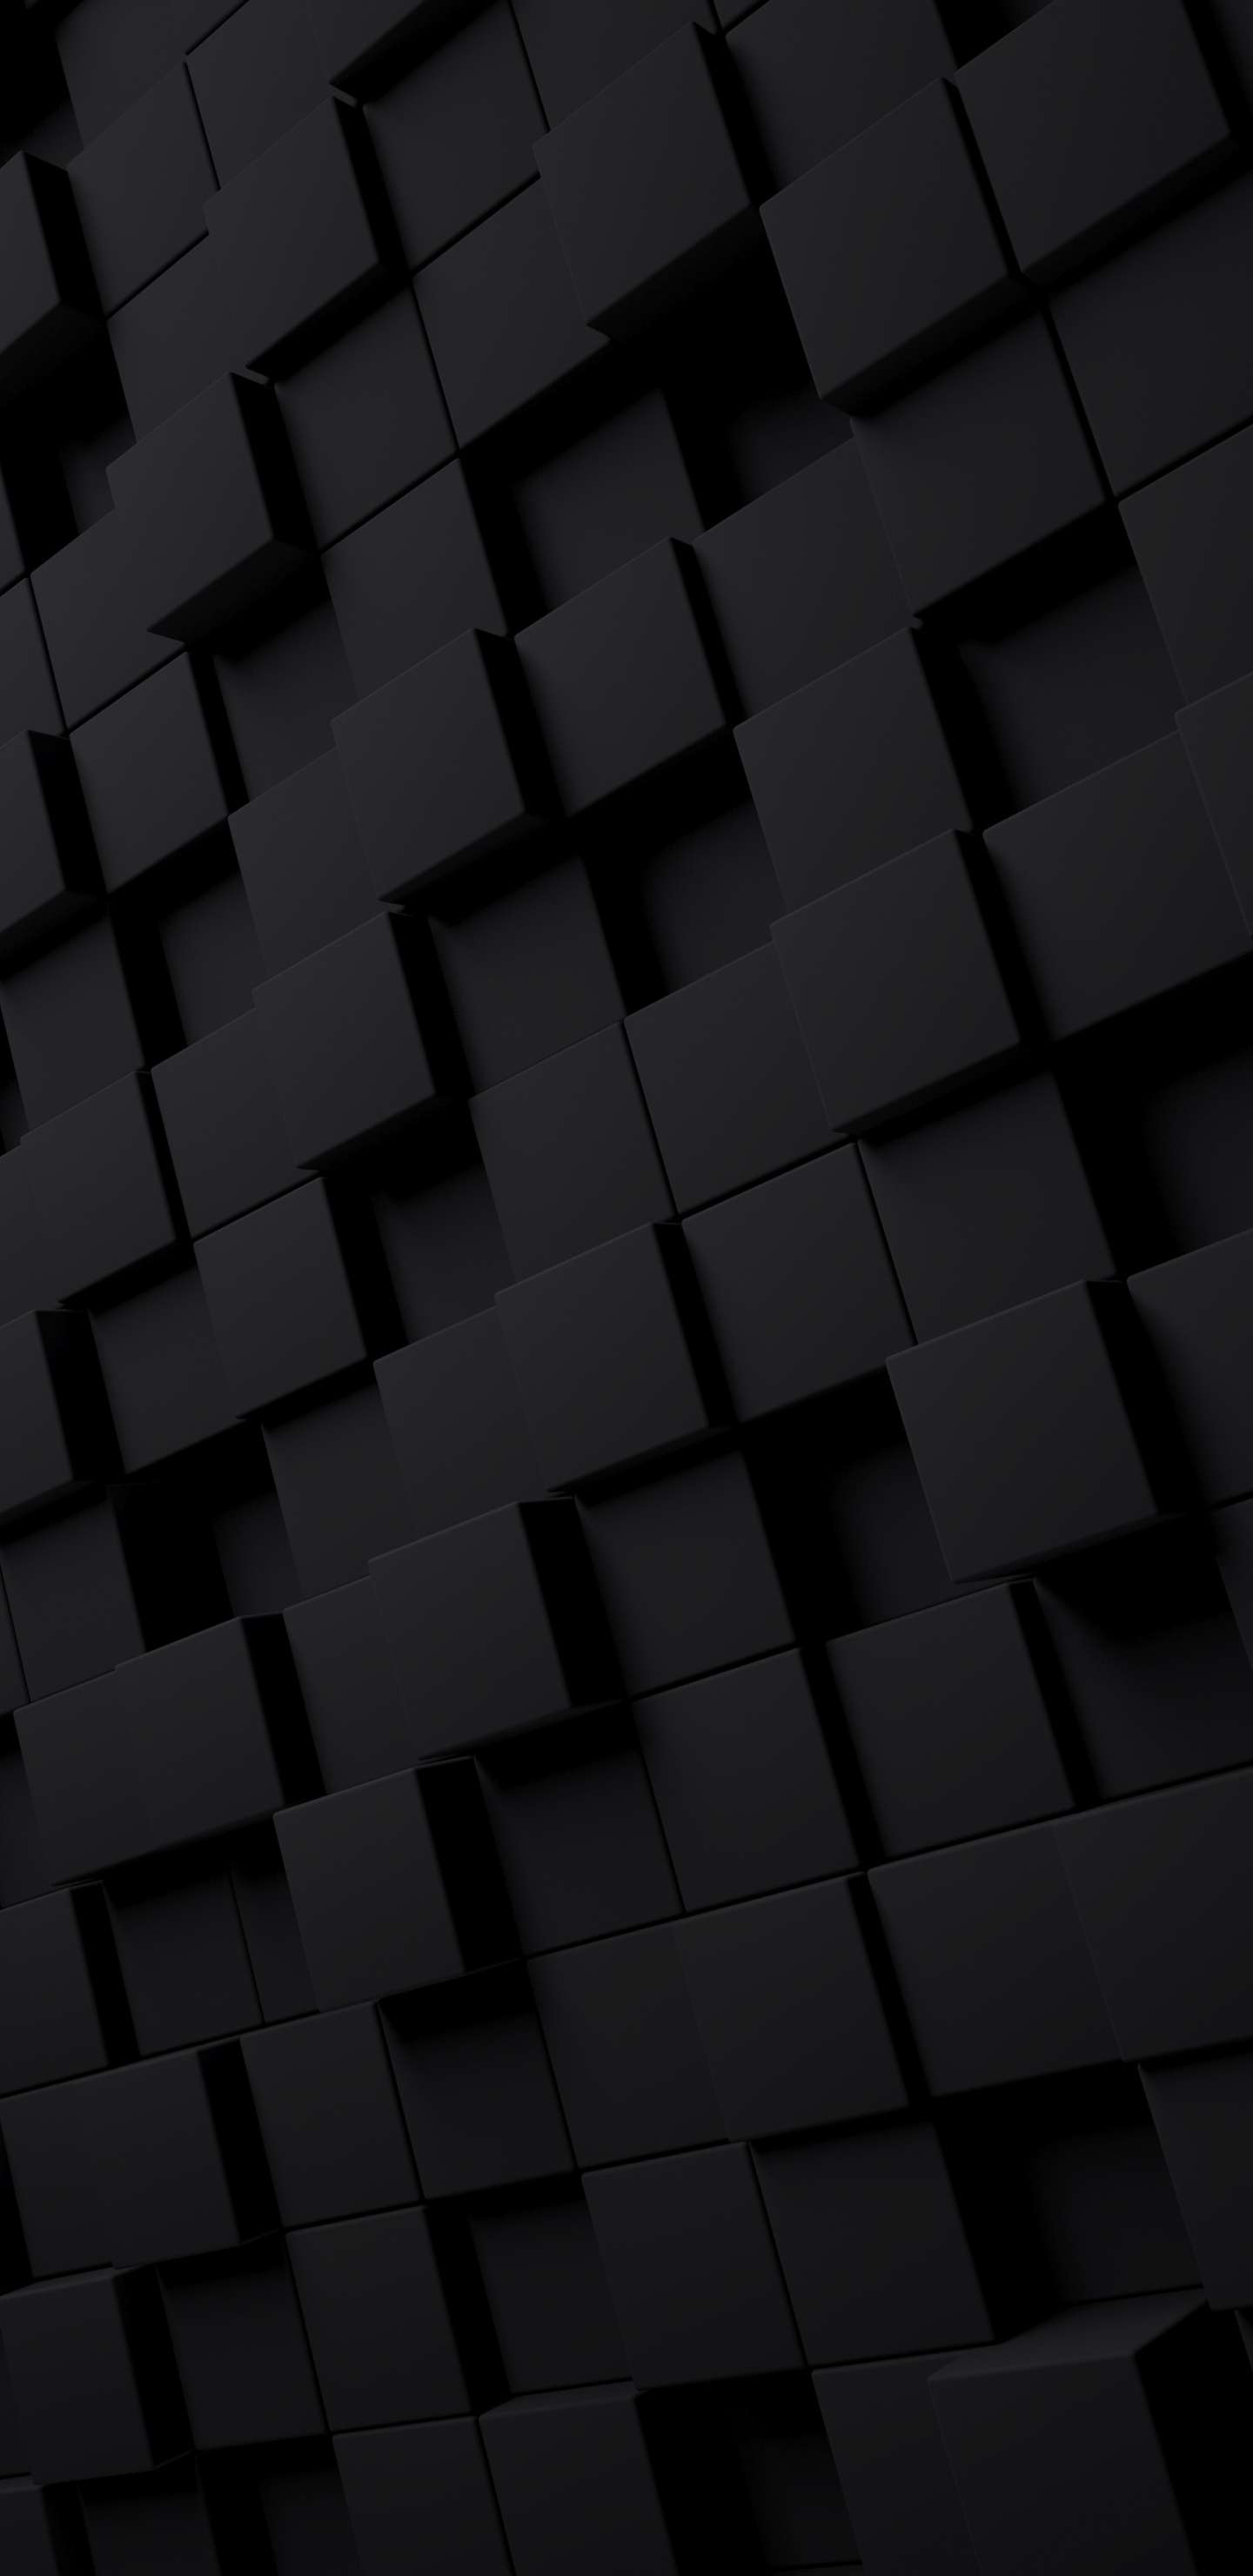 Download wallpaper 1440x2960 tiles black grid abstract samsung galaxy  s8 samsung galaxy s8 plus 1440x2960 hd background 5124